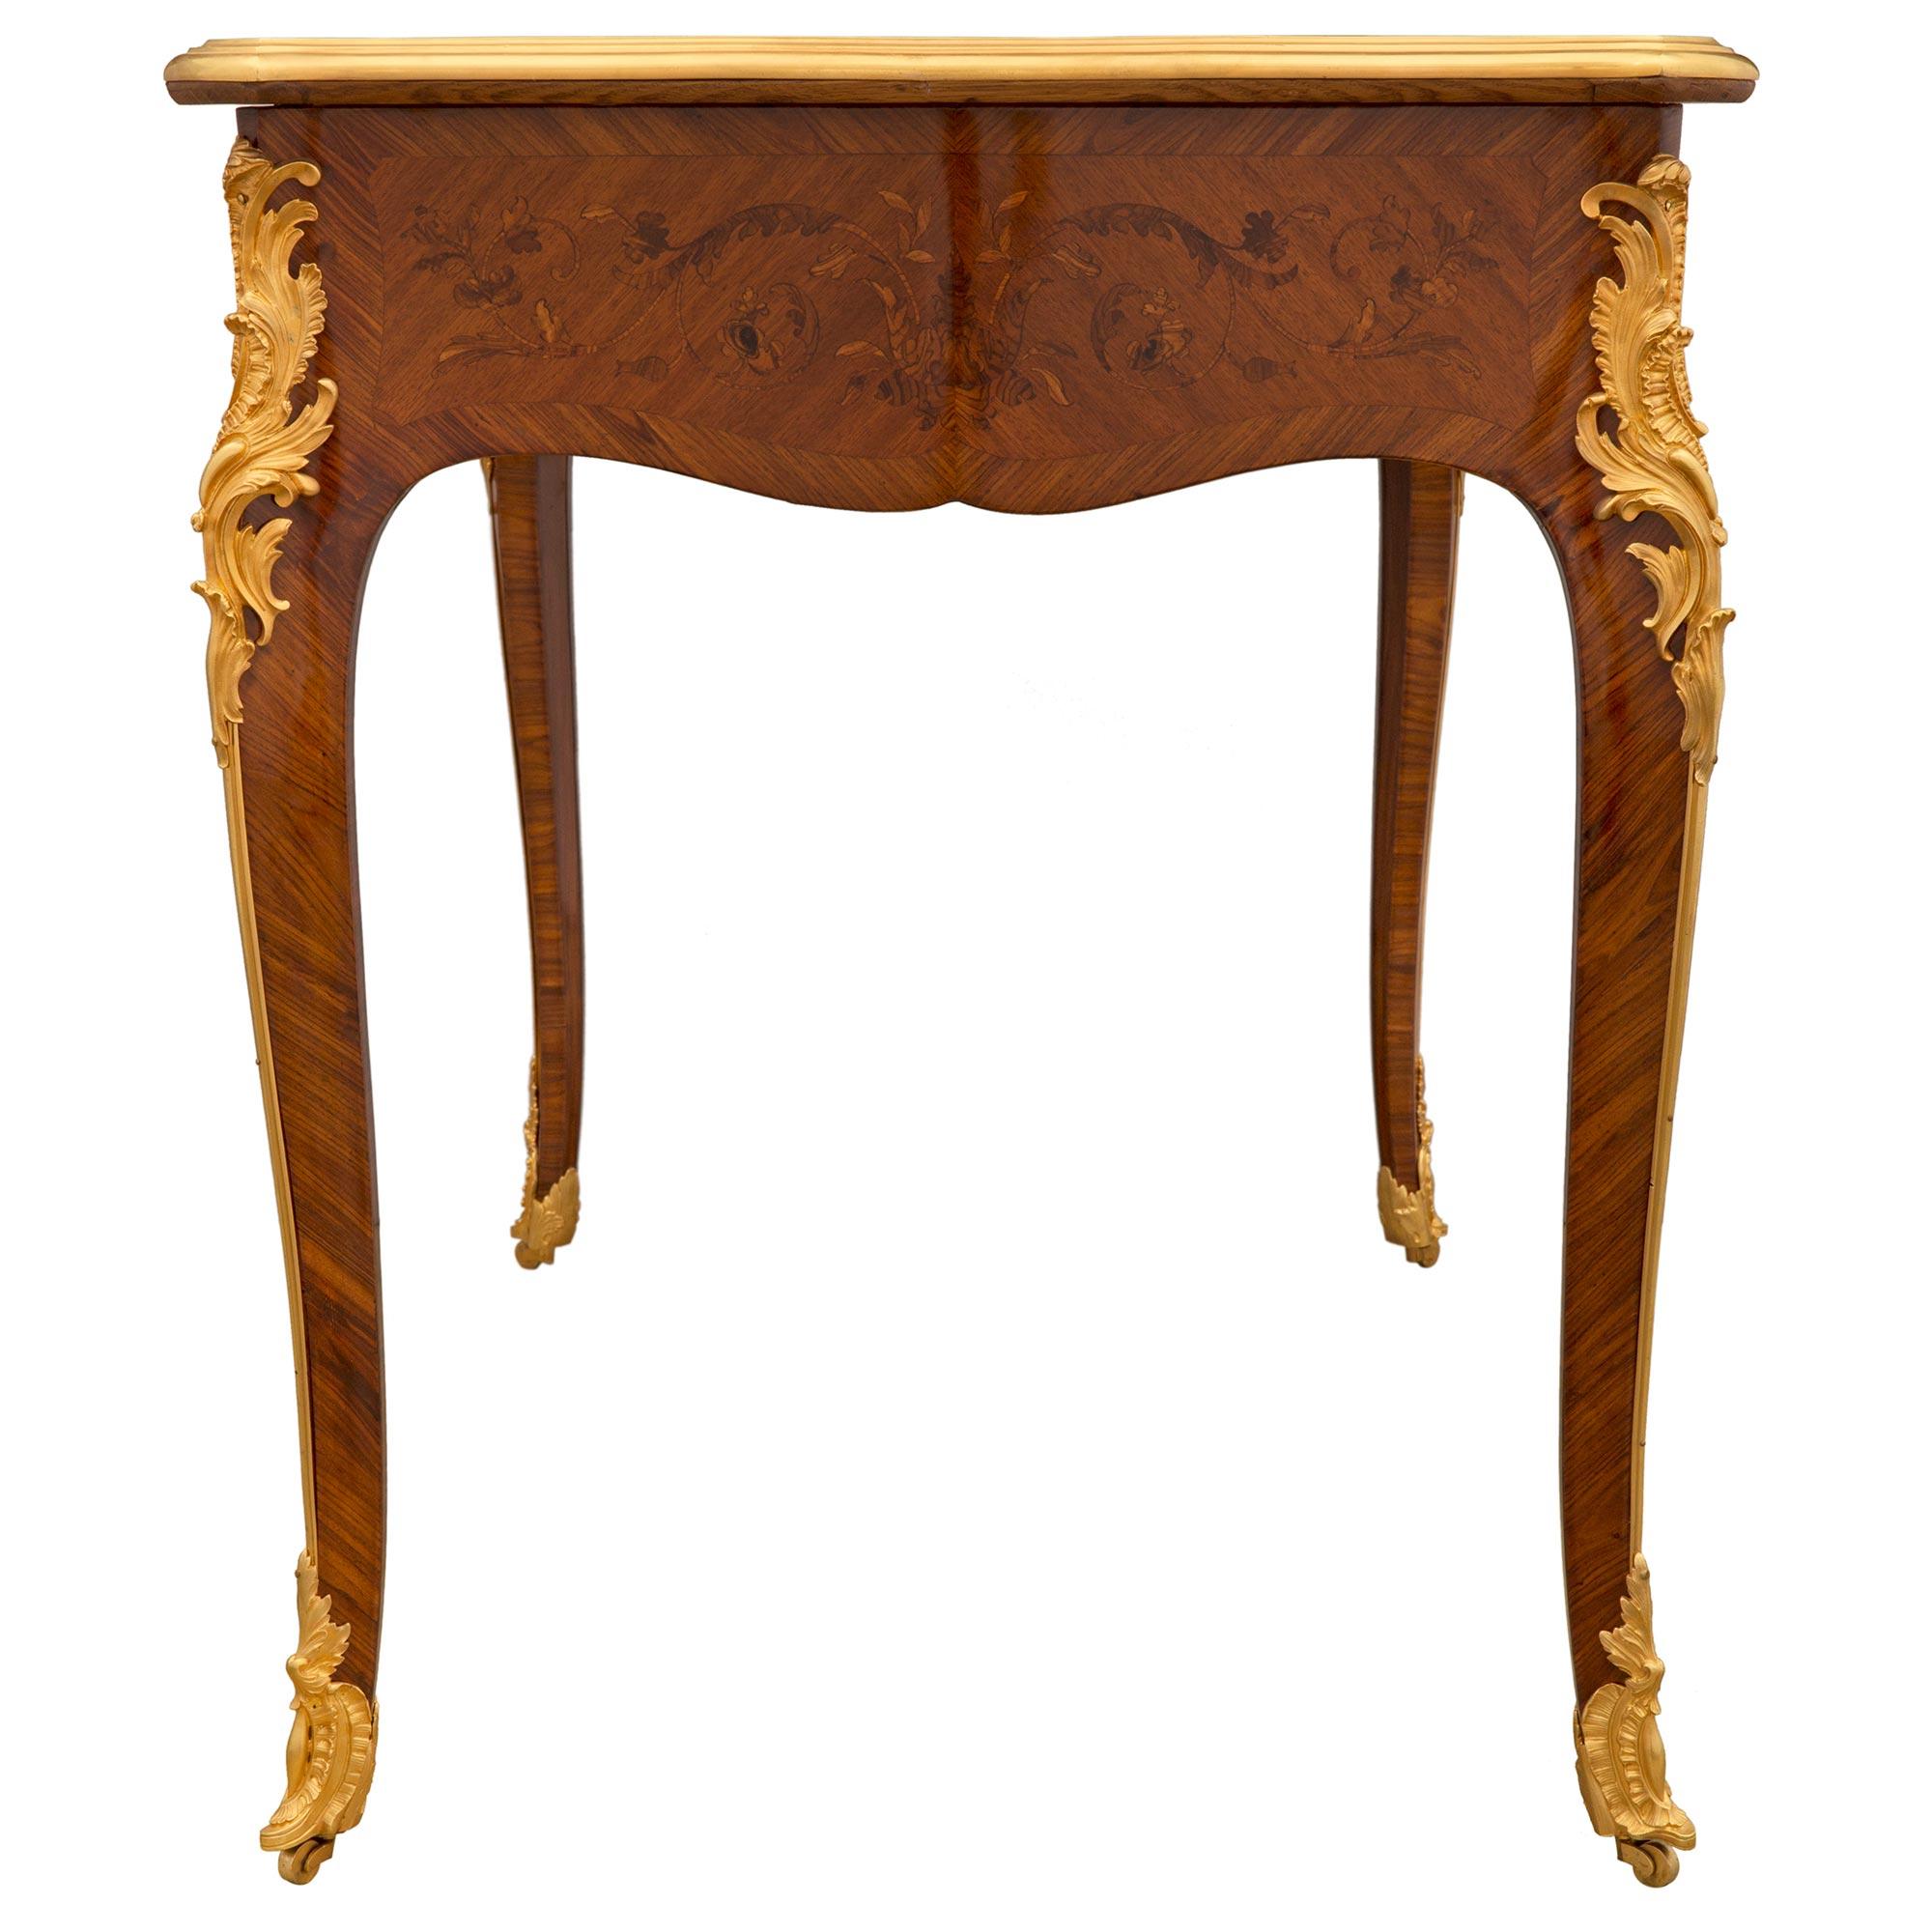 French 19th Century Louis XV Style Tulipwood and Kingwood Desk For Sale 1